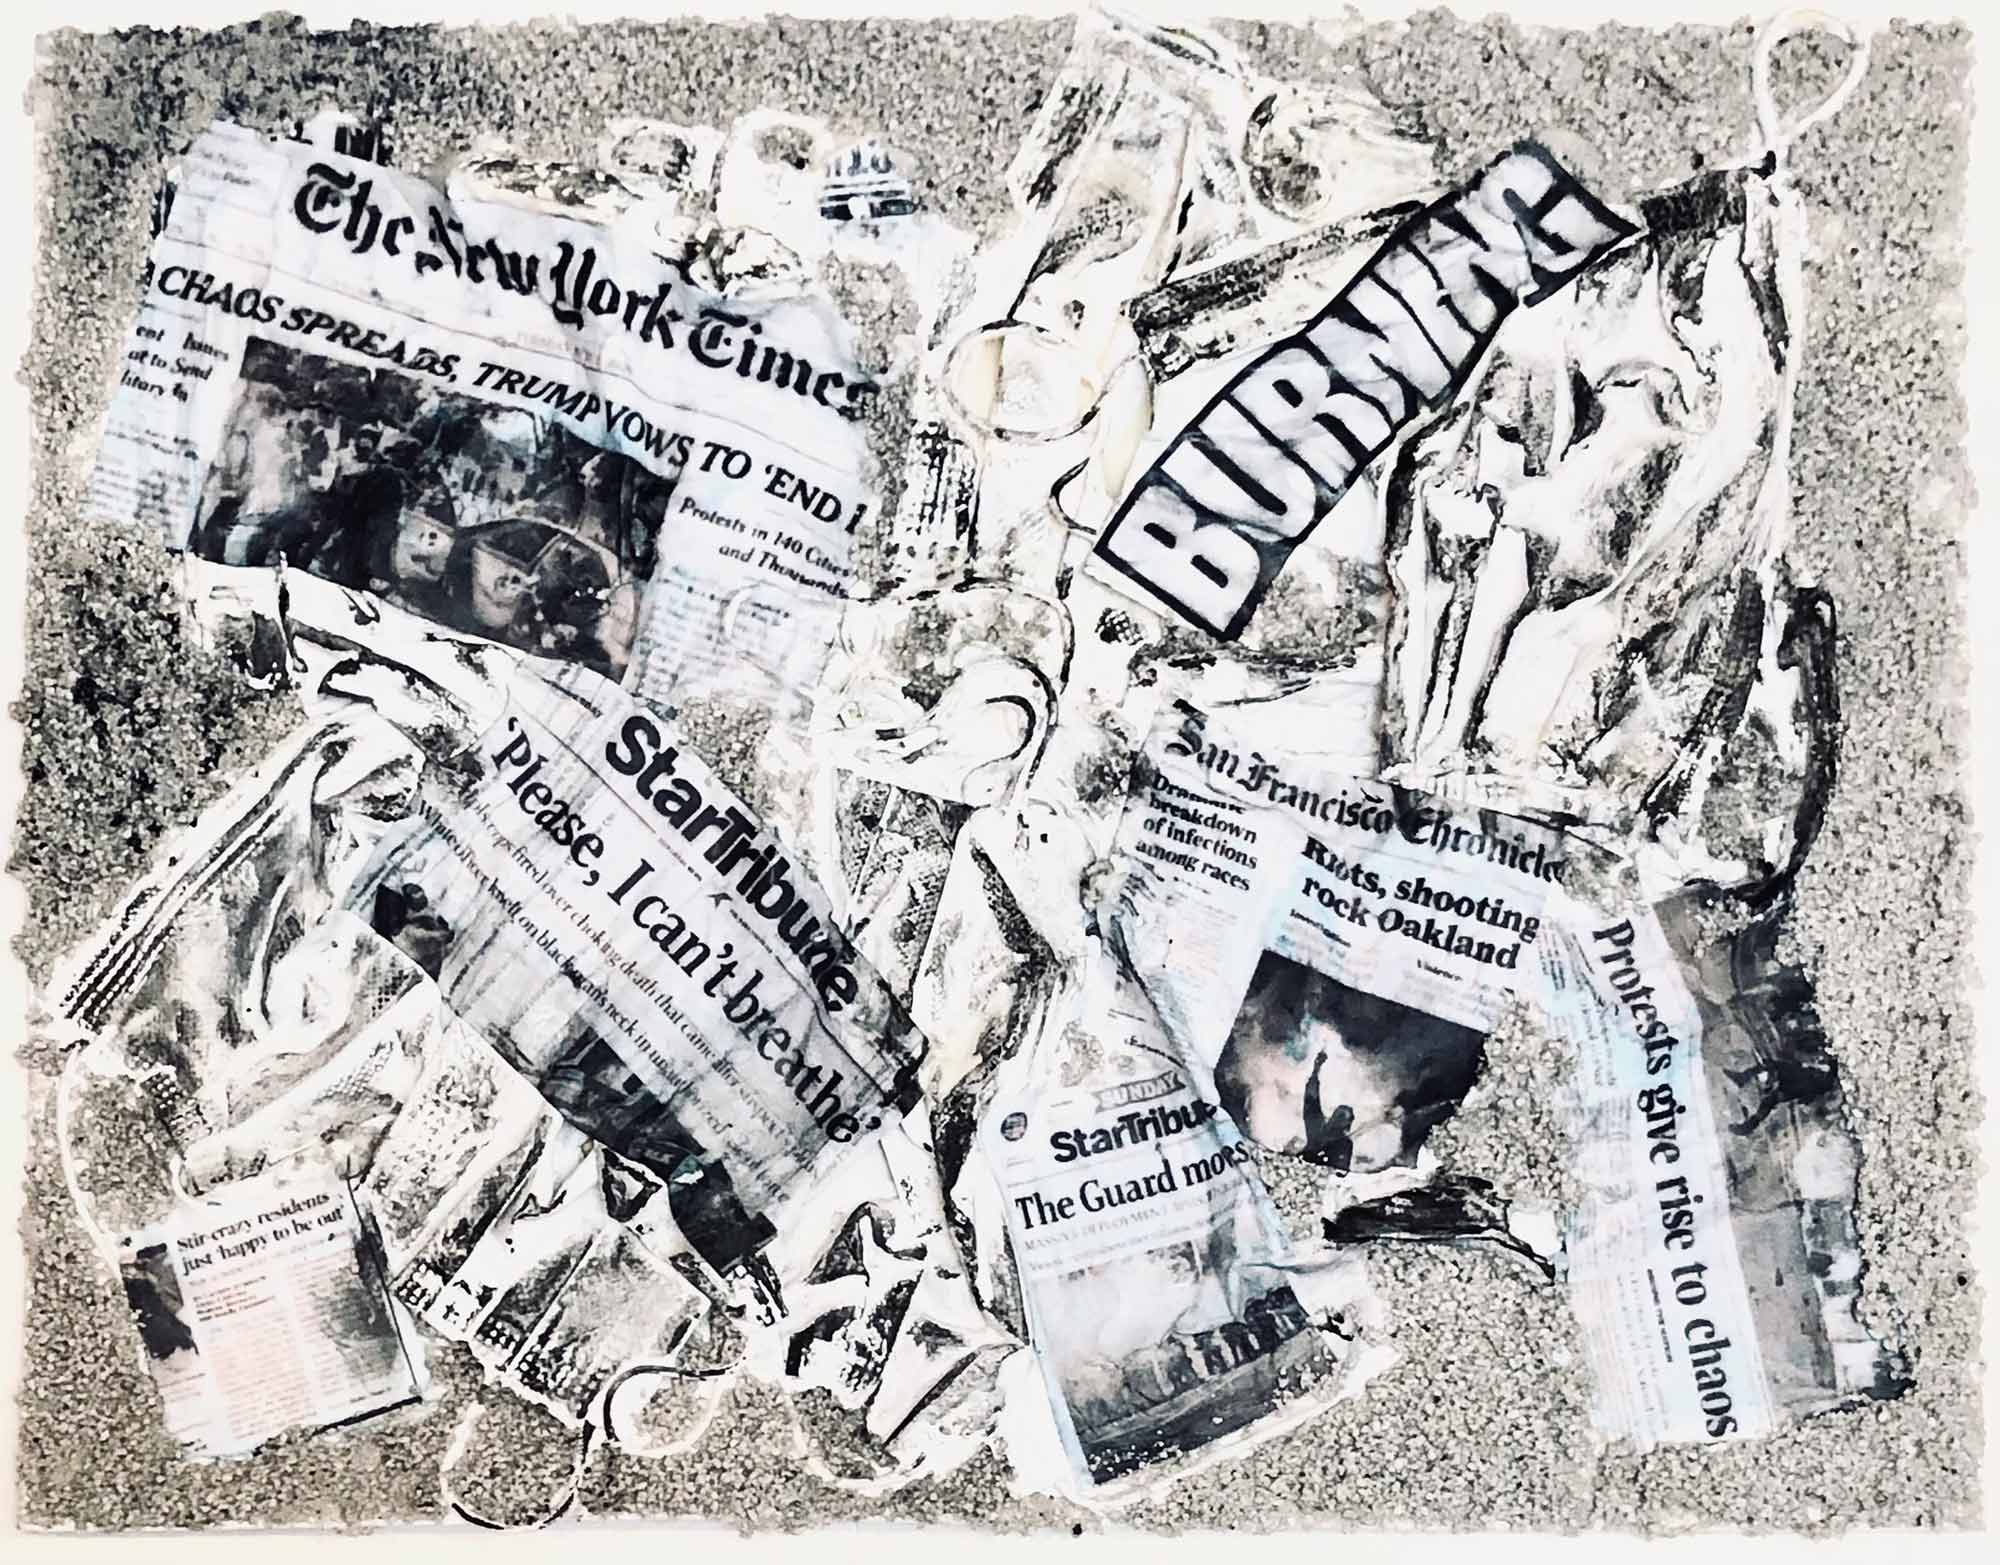 Photo of Megan Gerber’s mixed media piece “Unmasked.” In the collaged image, the front pages of newspapers fill out the forms of surgical masks, taking on their layered texture. The pile of masks with black and white headlines rests on a black, grainy surface that looks like concrete. Some words seen include “Please, I can’t breathe,” “Riots, shootings rock Oakland,” “Chaos spread, Trump vows to end..”